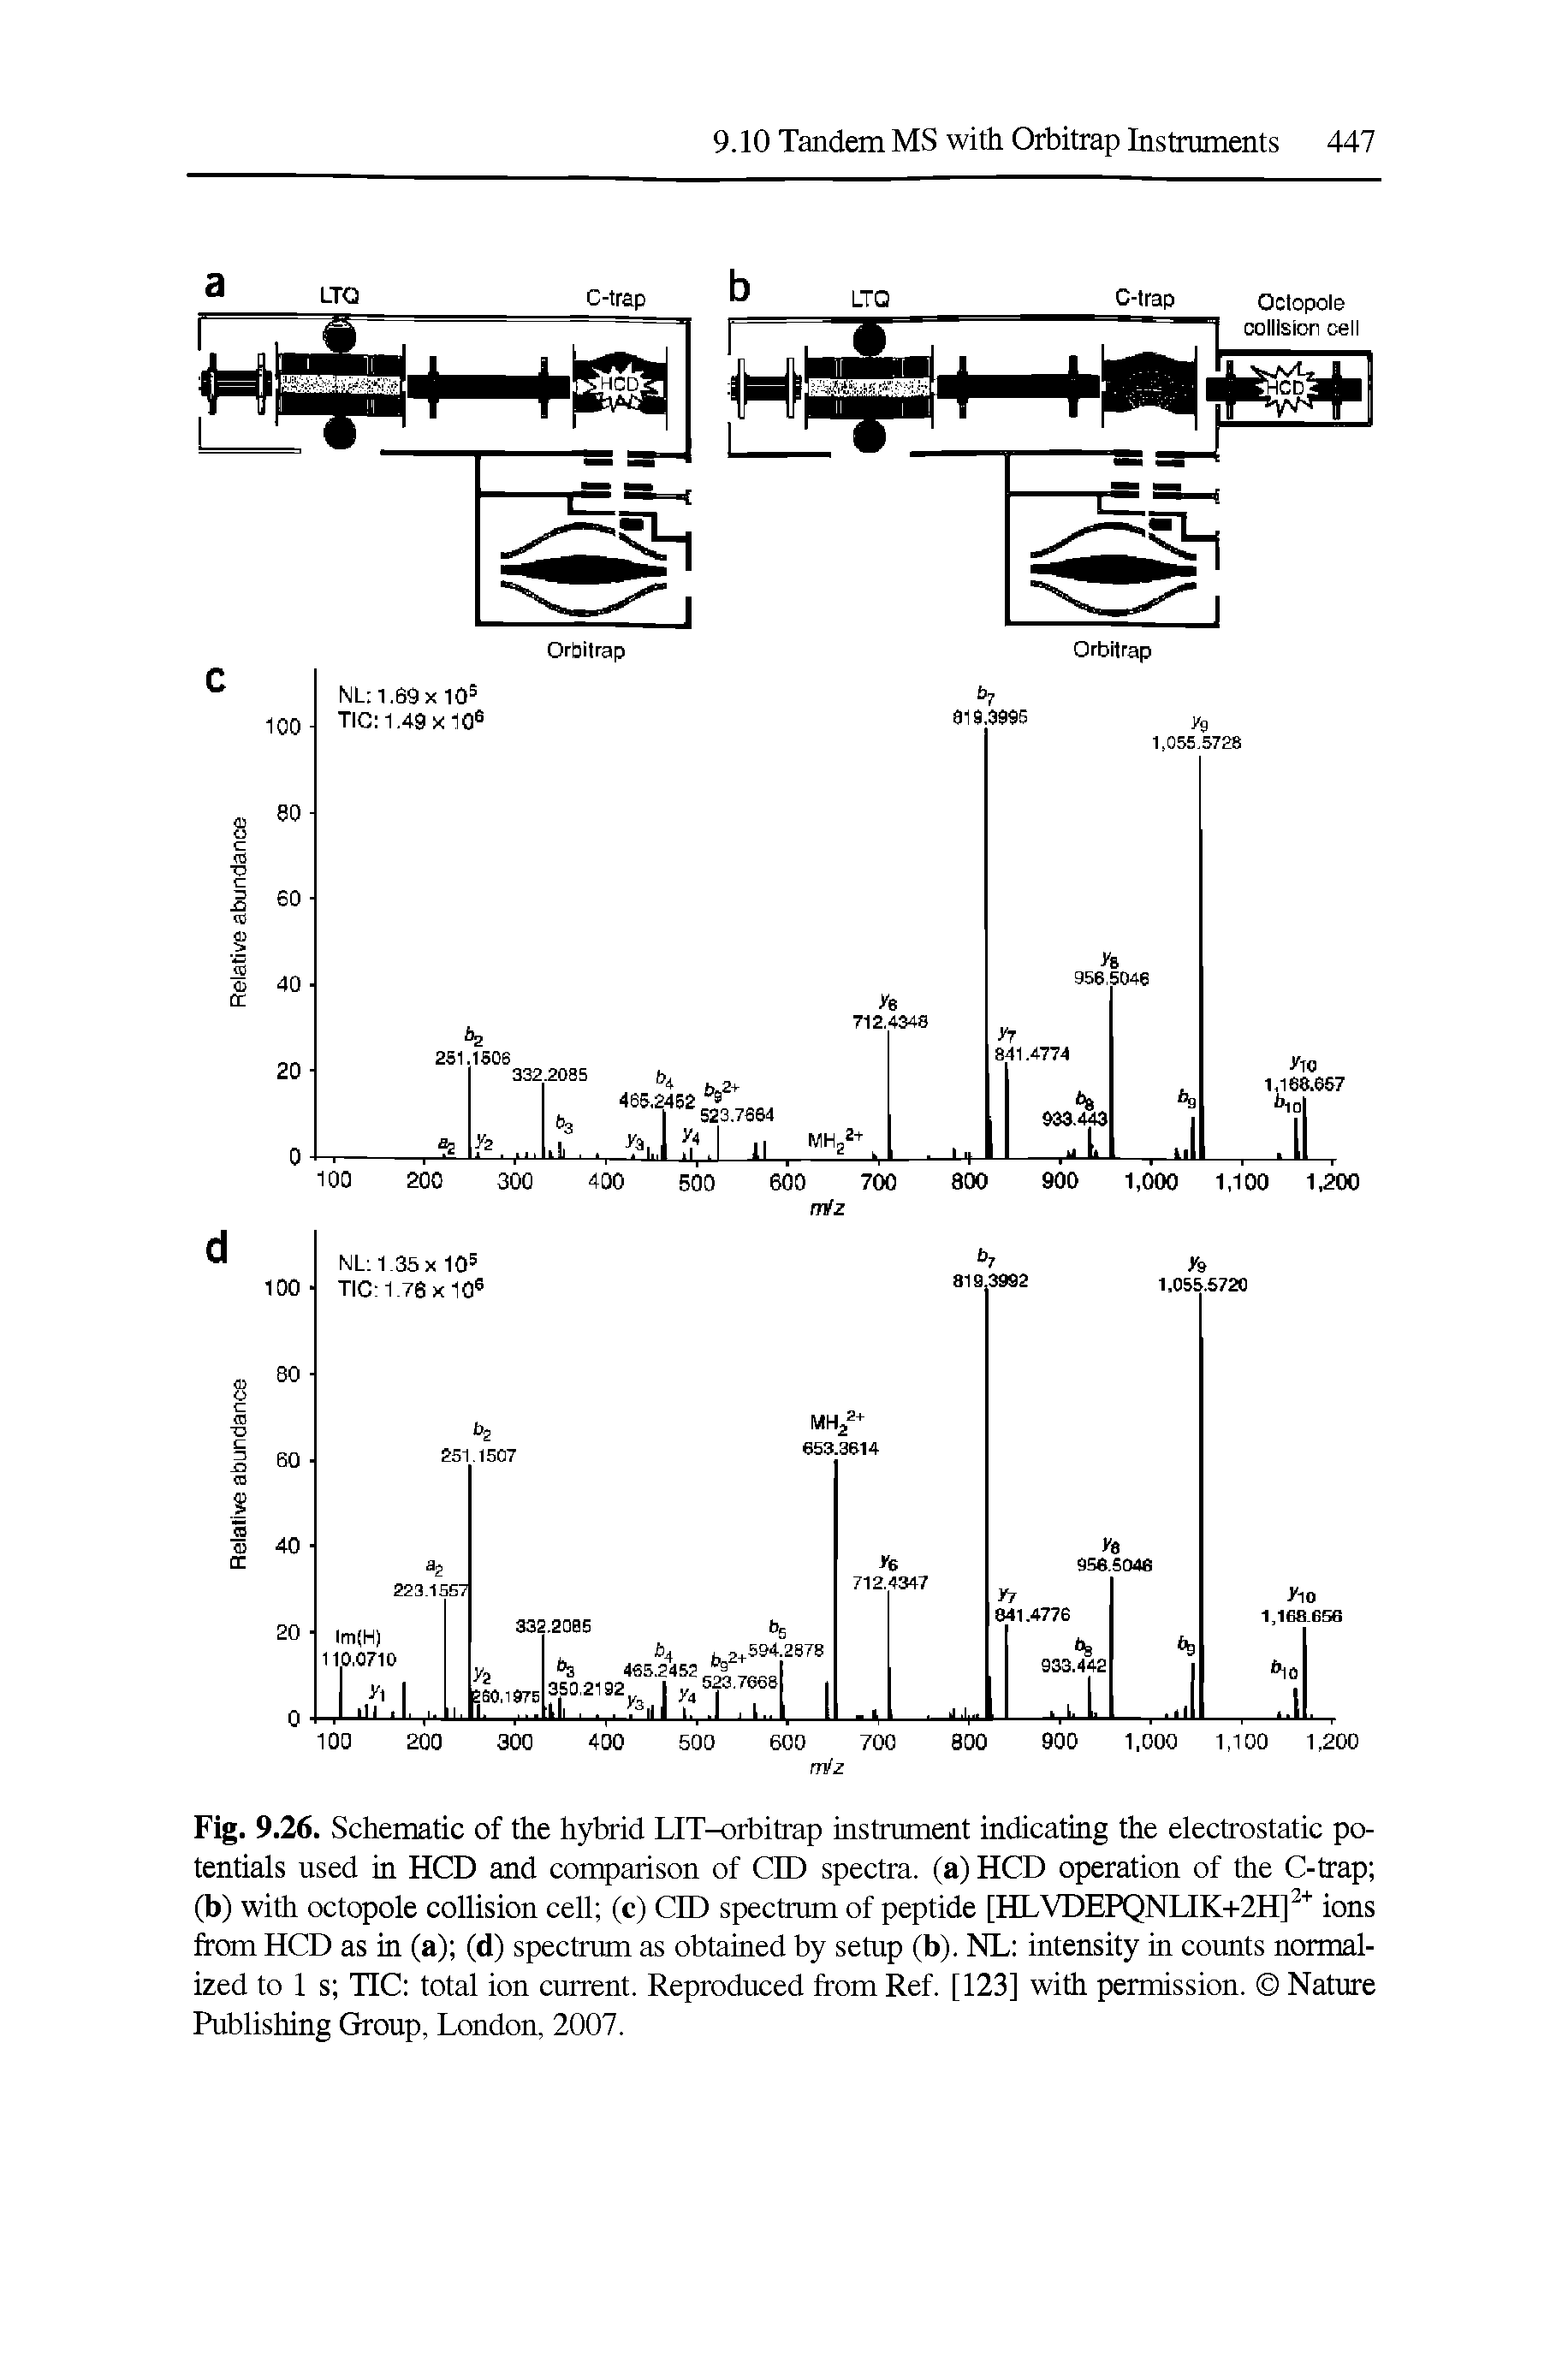 Fig. 9.26. Schematic of the hybrid LIT-orbitrap instrument indicating the electrostatic potentials used in HCD and comparison of QD spectra, (a) HCD operation of the C-trap (b) with octopole collision ceU (c) CID spectrum of peptide [HLVDEPQNLIK+2H] ions from HCD as in (a) (d) spectrum as obtained by setup (b). NL intensity in counts normalized to 1 s TIC total ion current. Reproduced from Ref. [123] with permission. Nature Publishing Group, London, 2007.